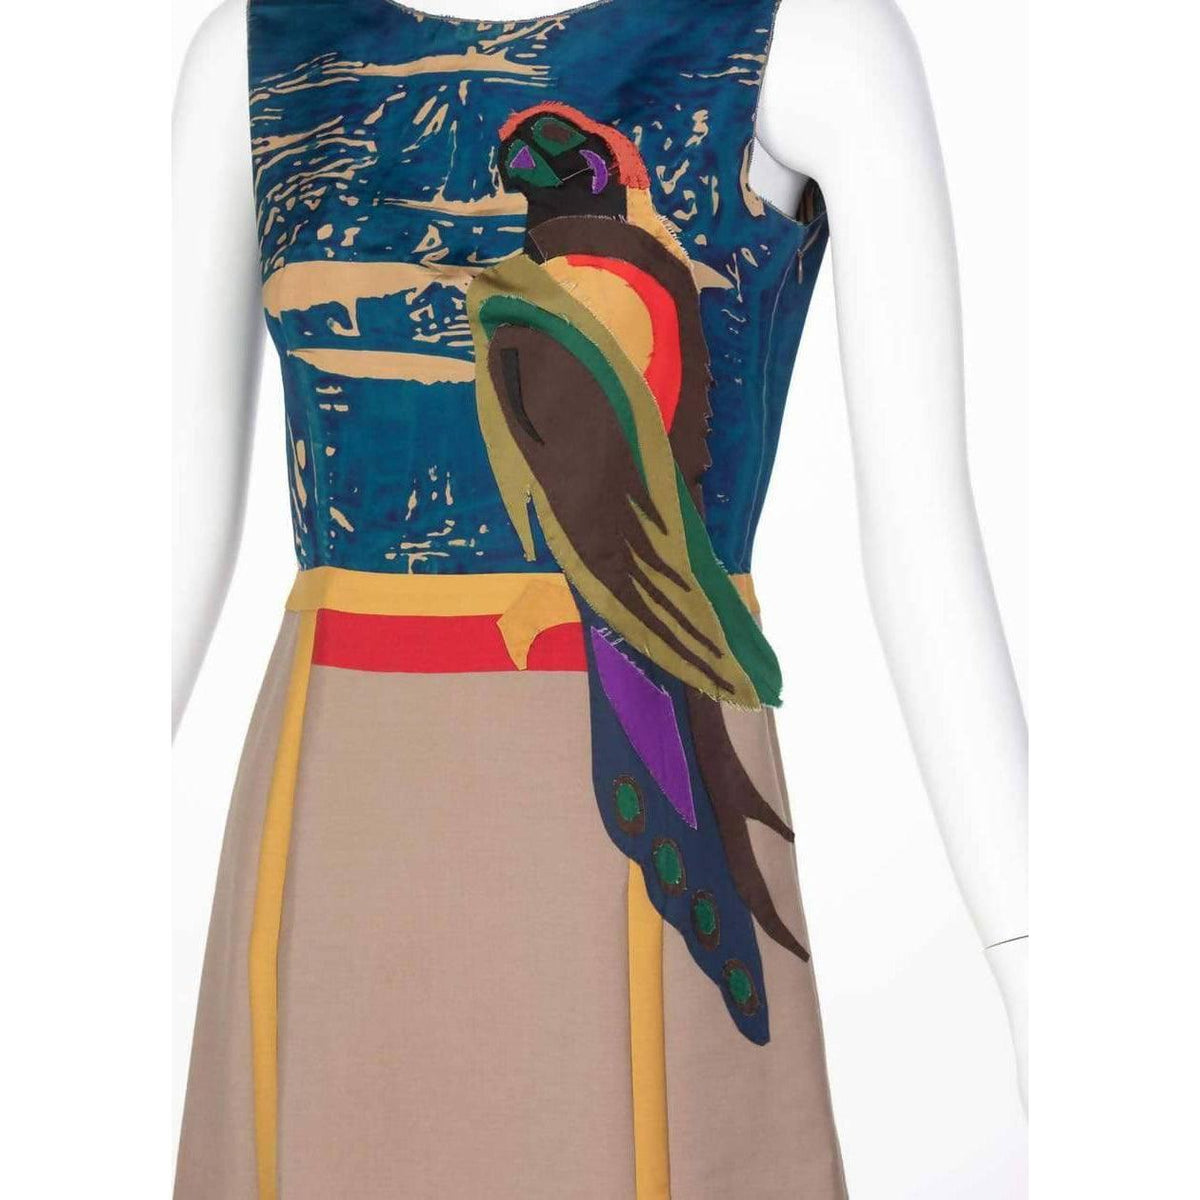 Pre-Owned PRADA Mohair Parrot Applique Dress Runway 2005 | Size S/M - theREMODA